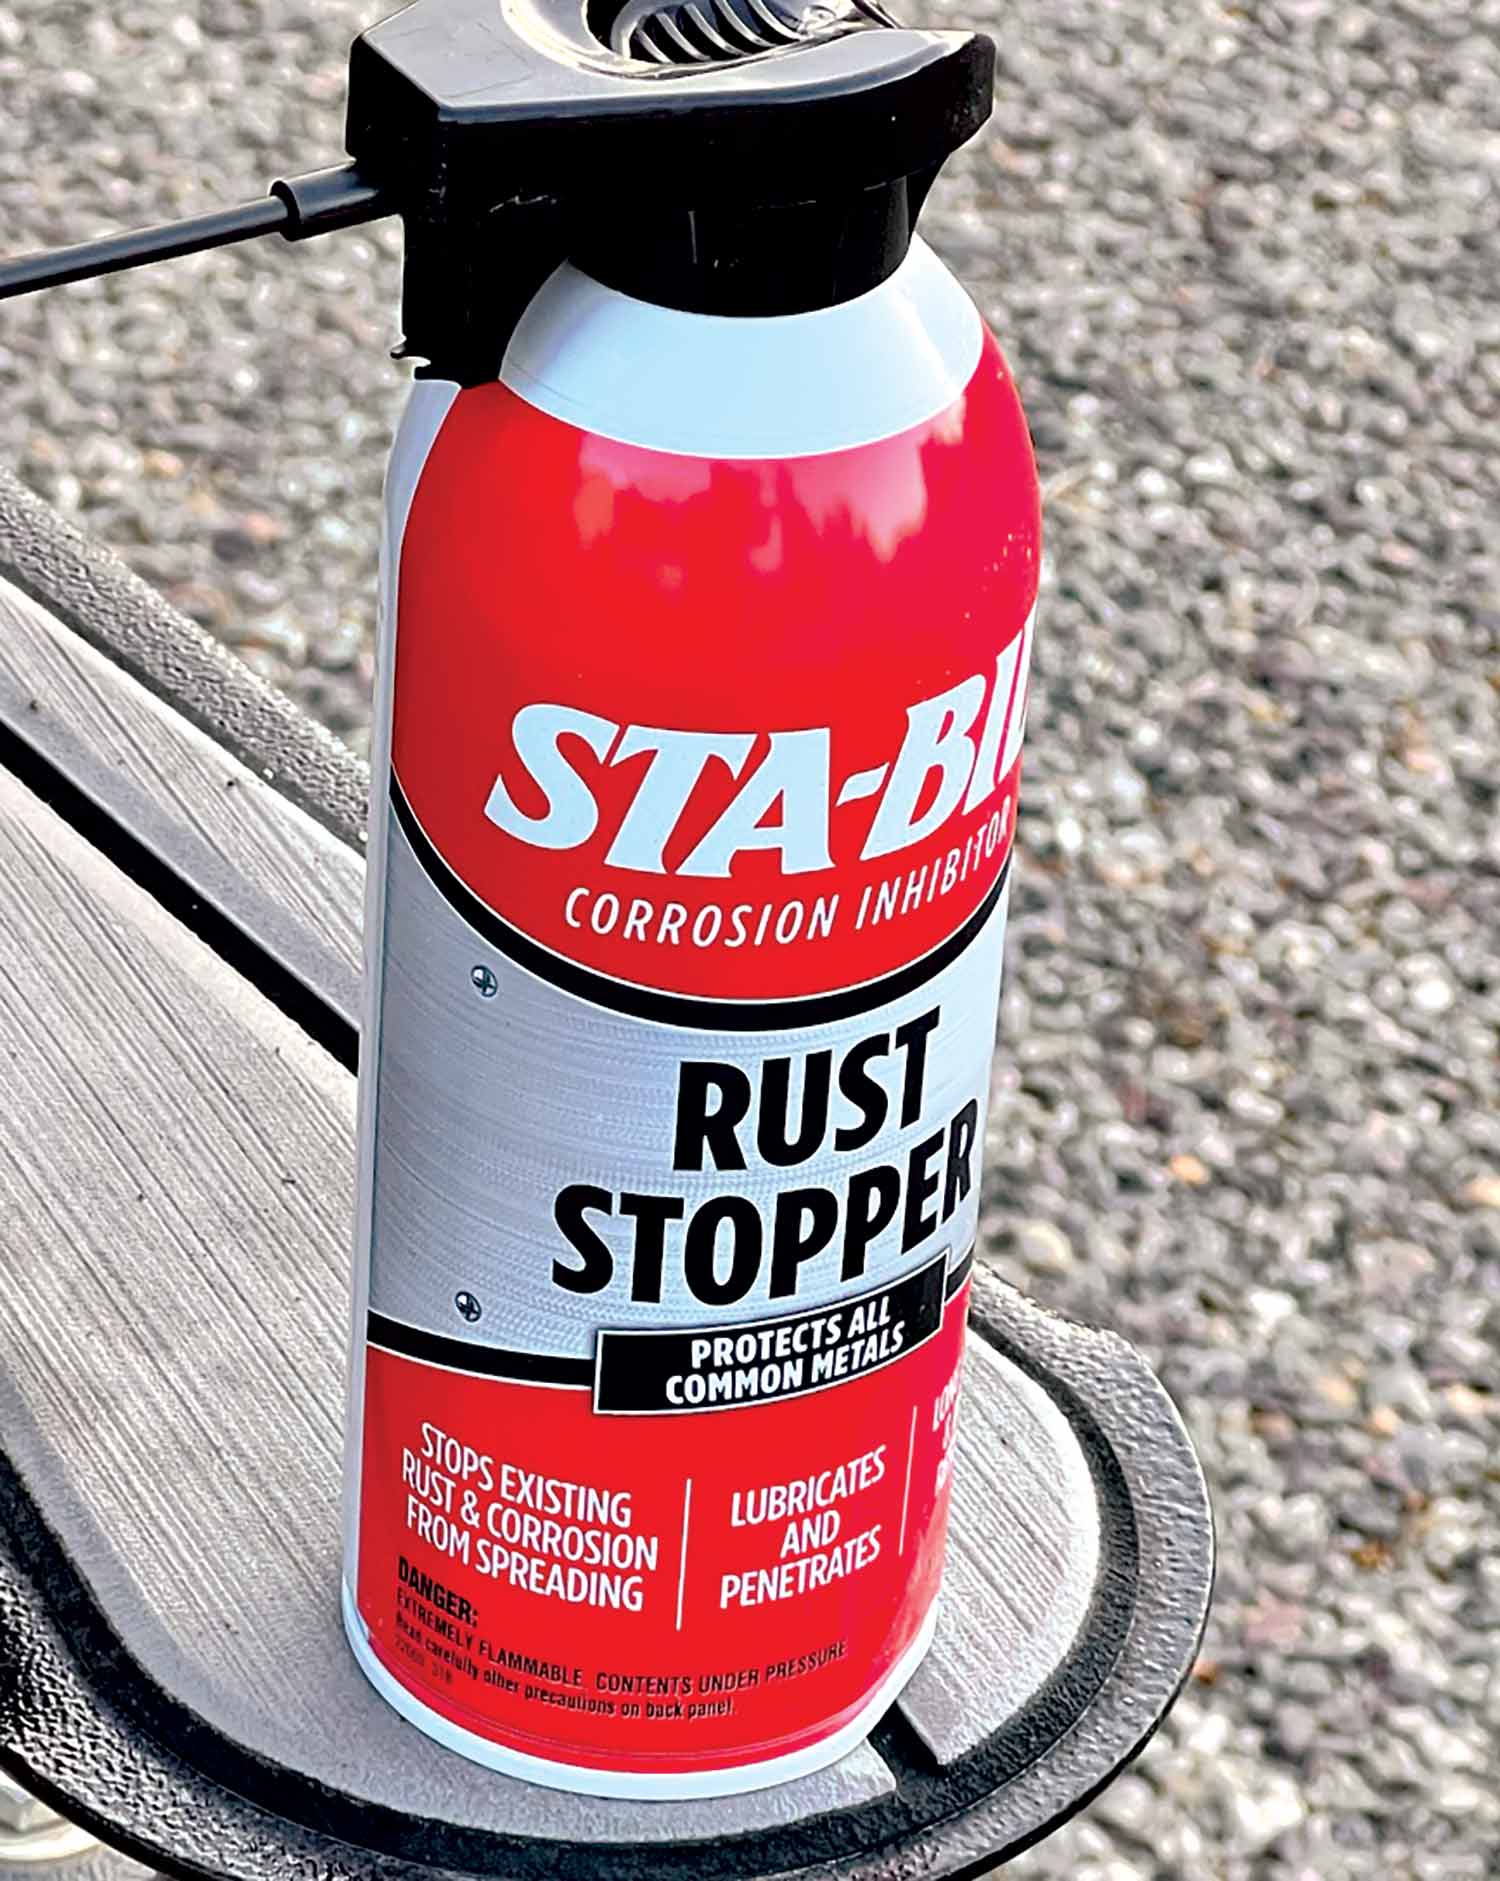 Close-up photograph perspective of STA-BIL's Rust Stopper aerosol protectant on top of a boat trailer hitch area